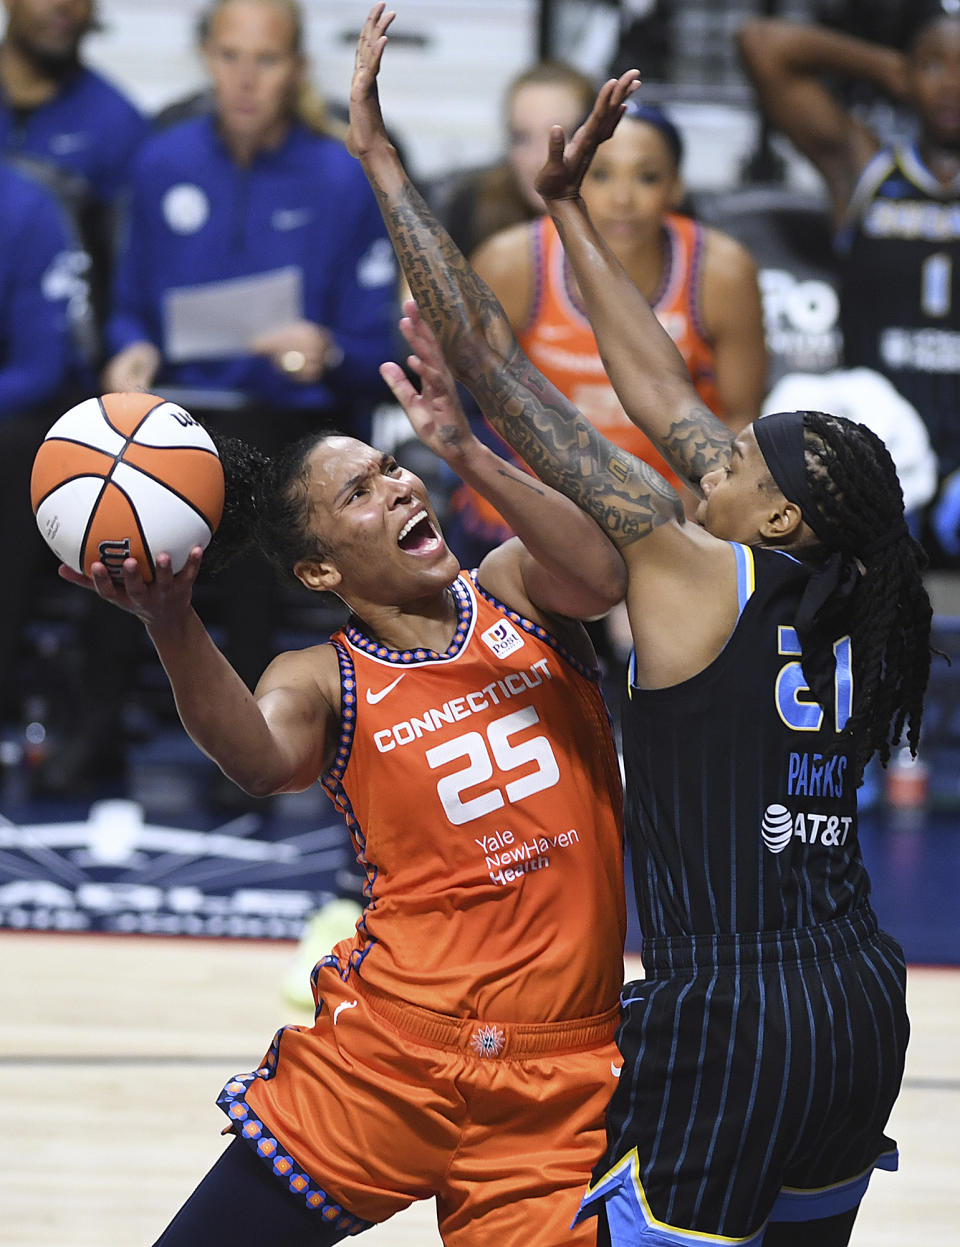 Connecticut Sun's Alyssa Thomas (25) puts up a basket against Chicago Sky's Robyn Parks (21) during a WNBA basketball game, Sunday, May 25, 2023, in Uncasville, Conn. (Sarah Gordon/The Day via AP)